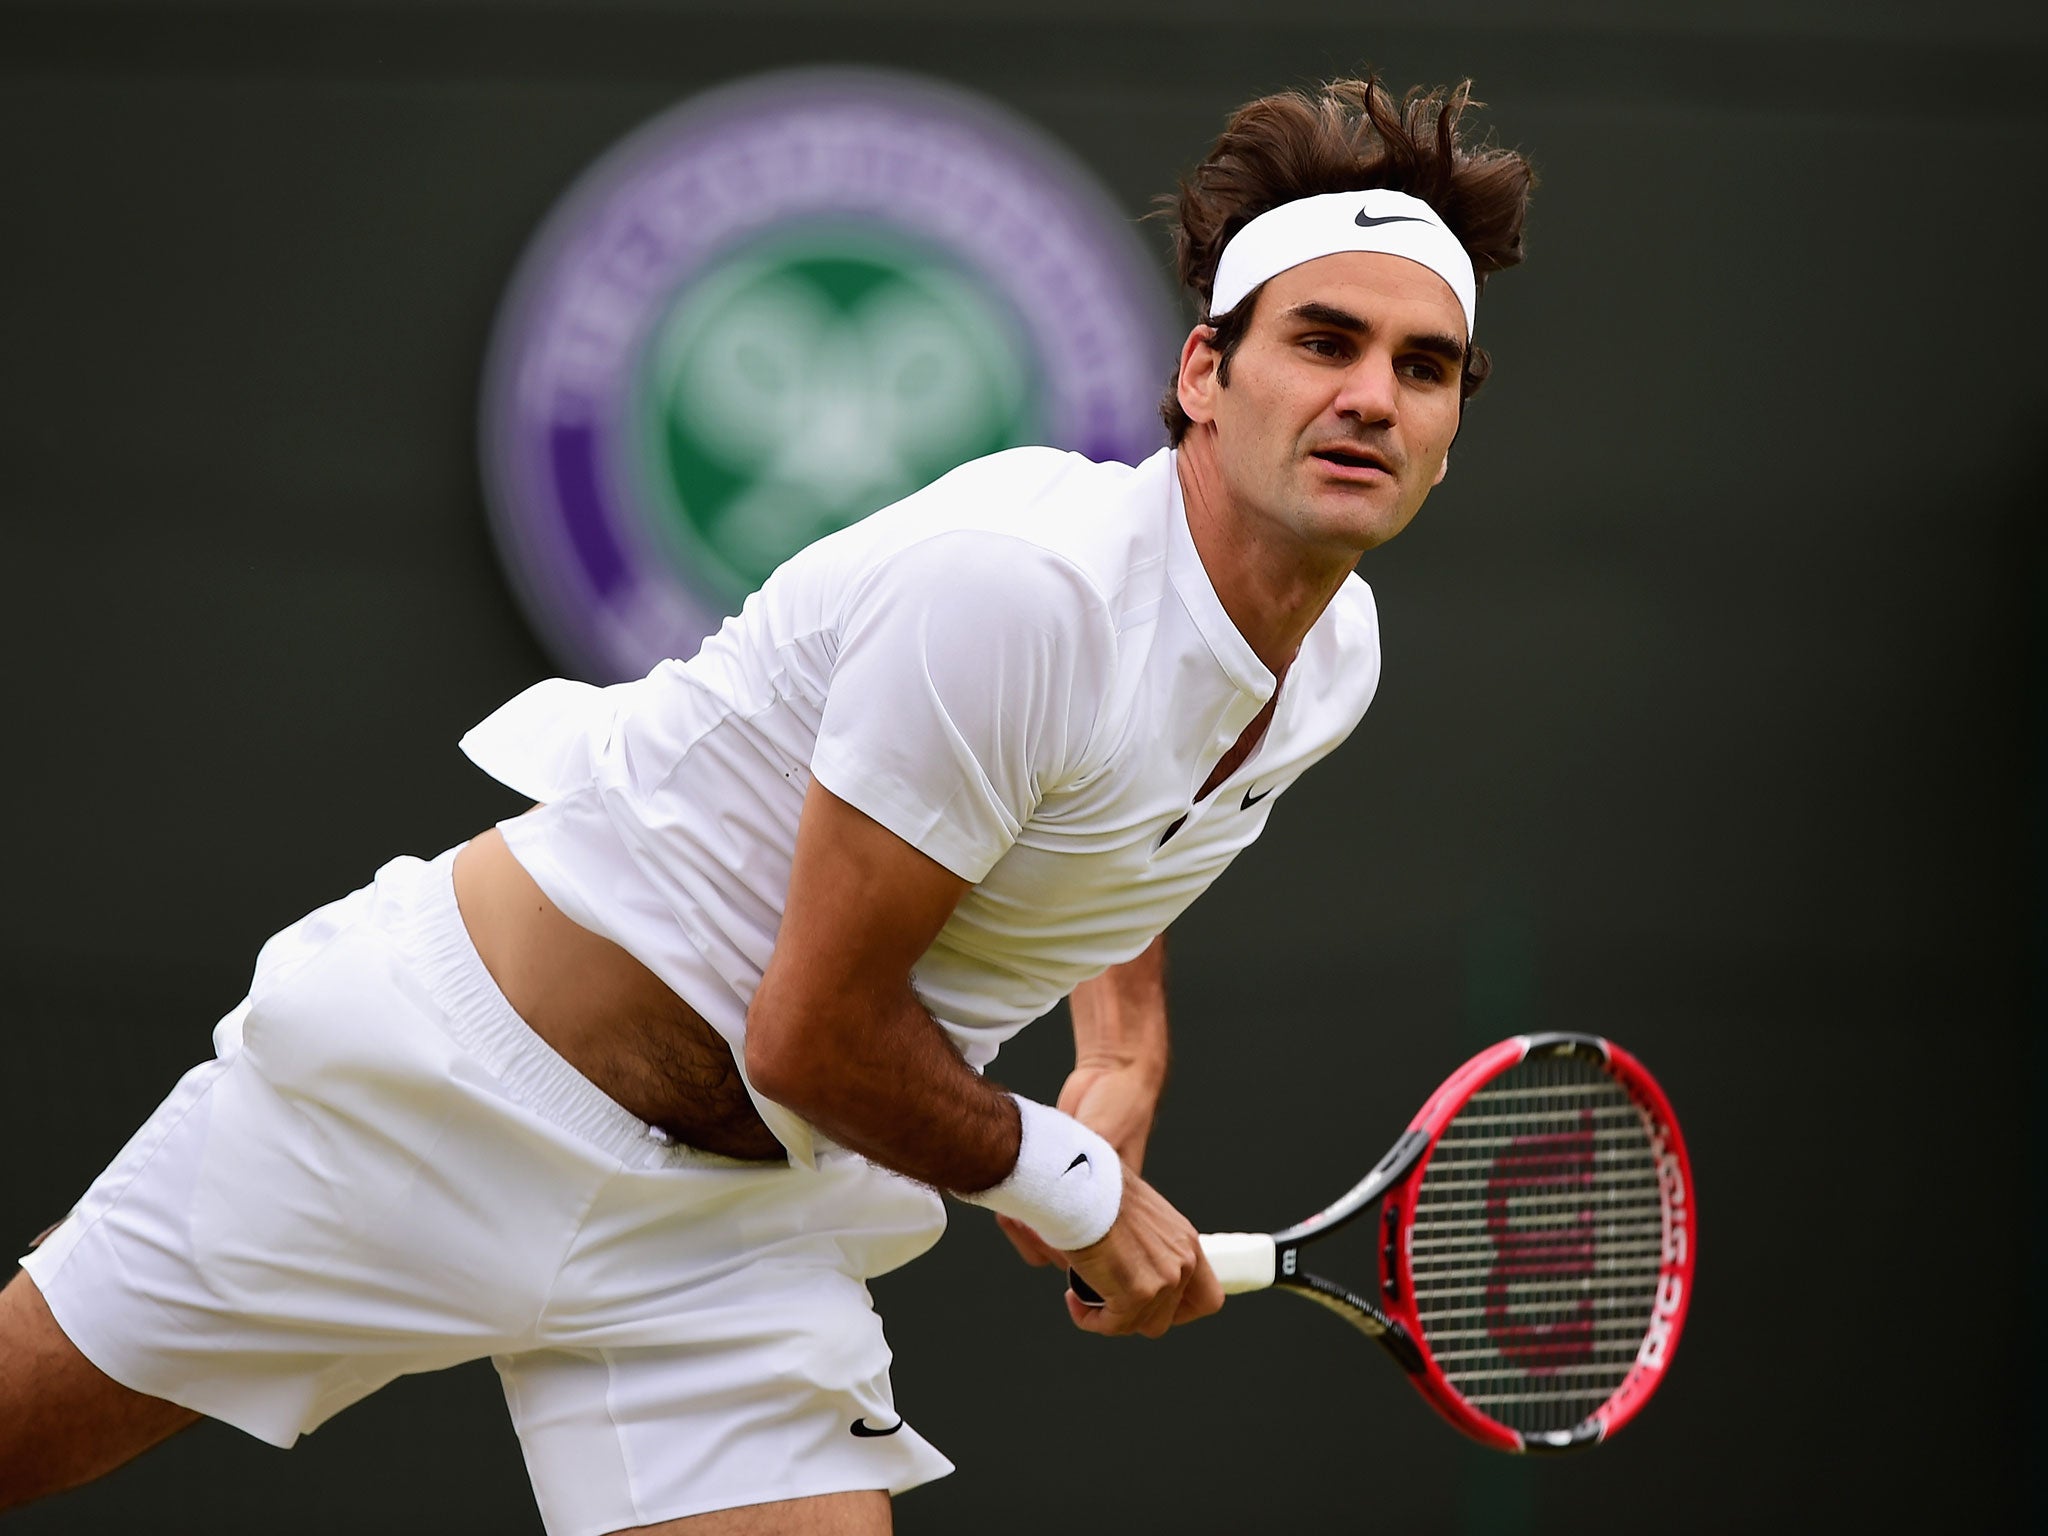 The seven-time Wimbledon champion Roger Federer has proved that a good serve is about more than raw power